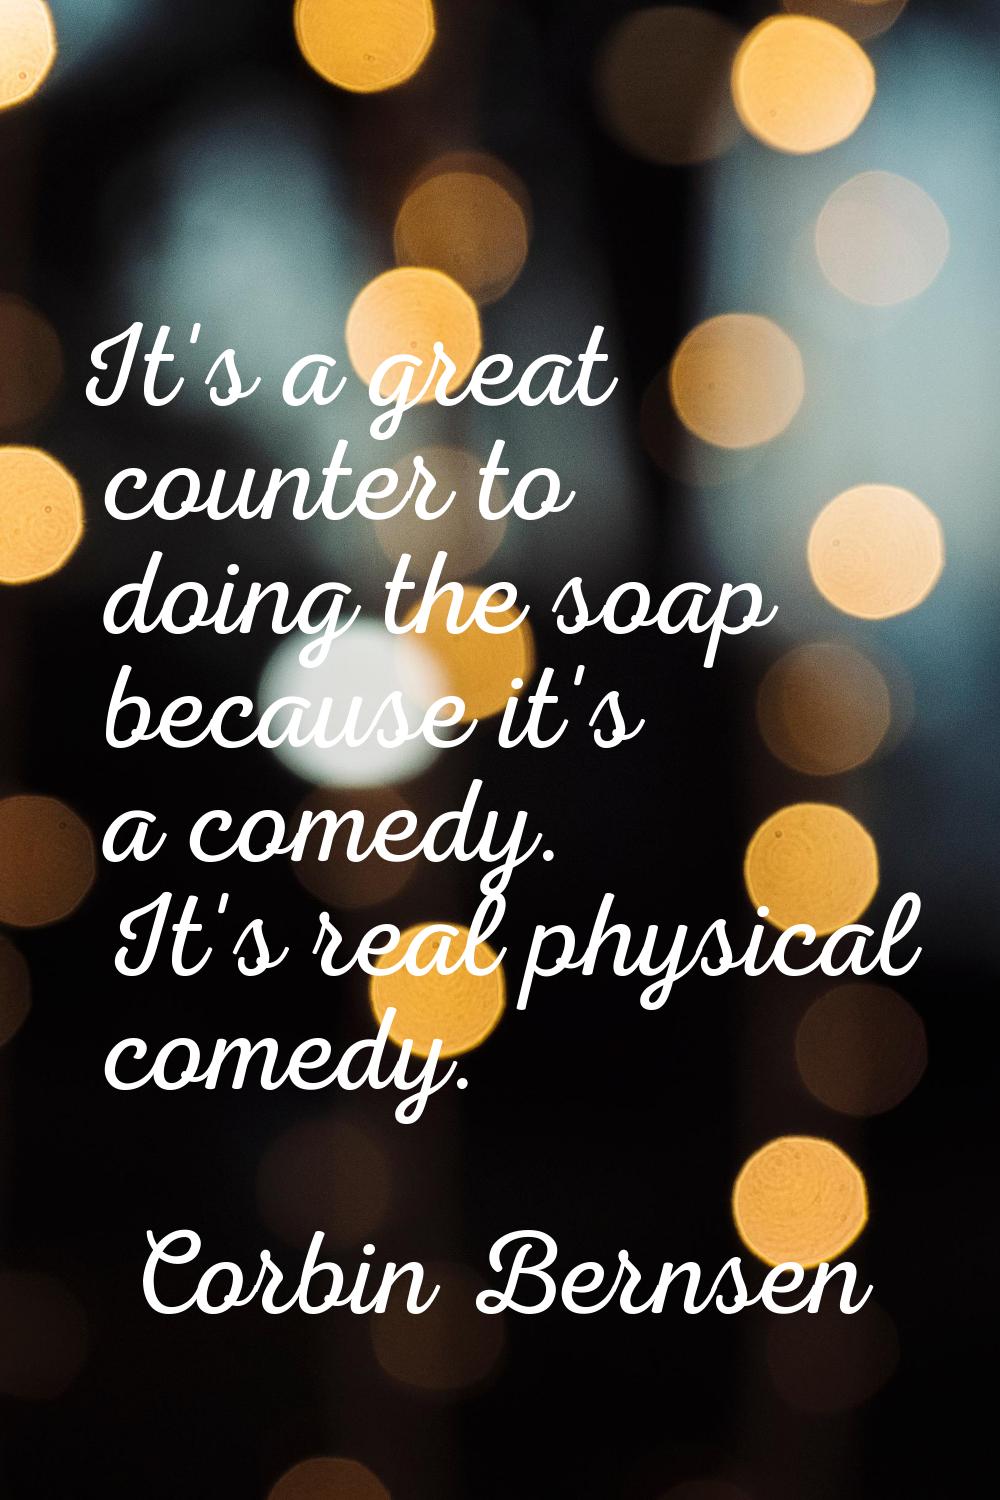 It's a great counter to doing the soap because it's a comedy. It's real physical comedy.